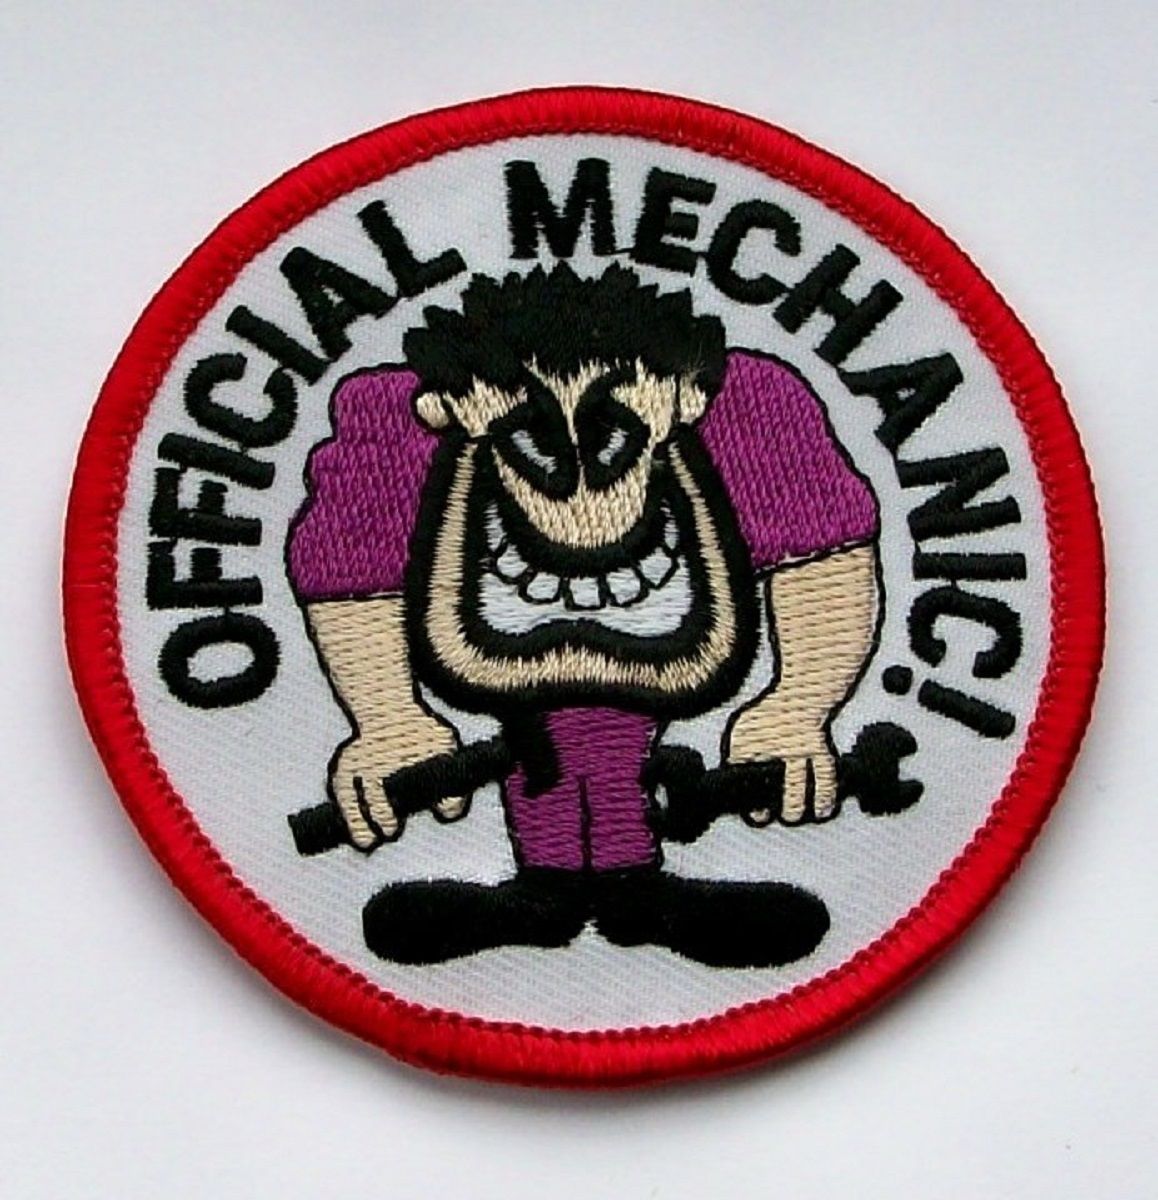 Official Mechanic embroidered cloth badge..